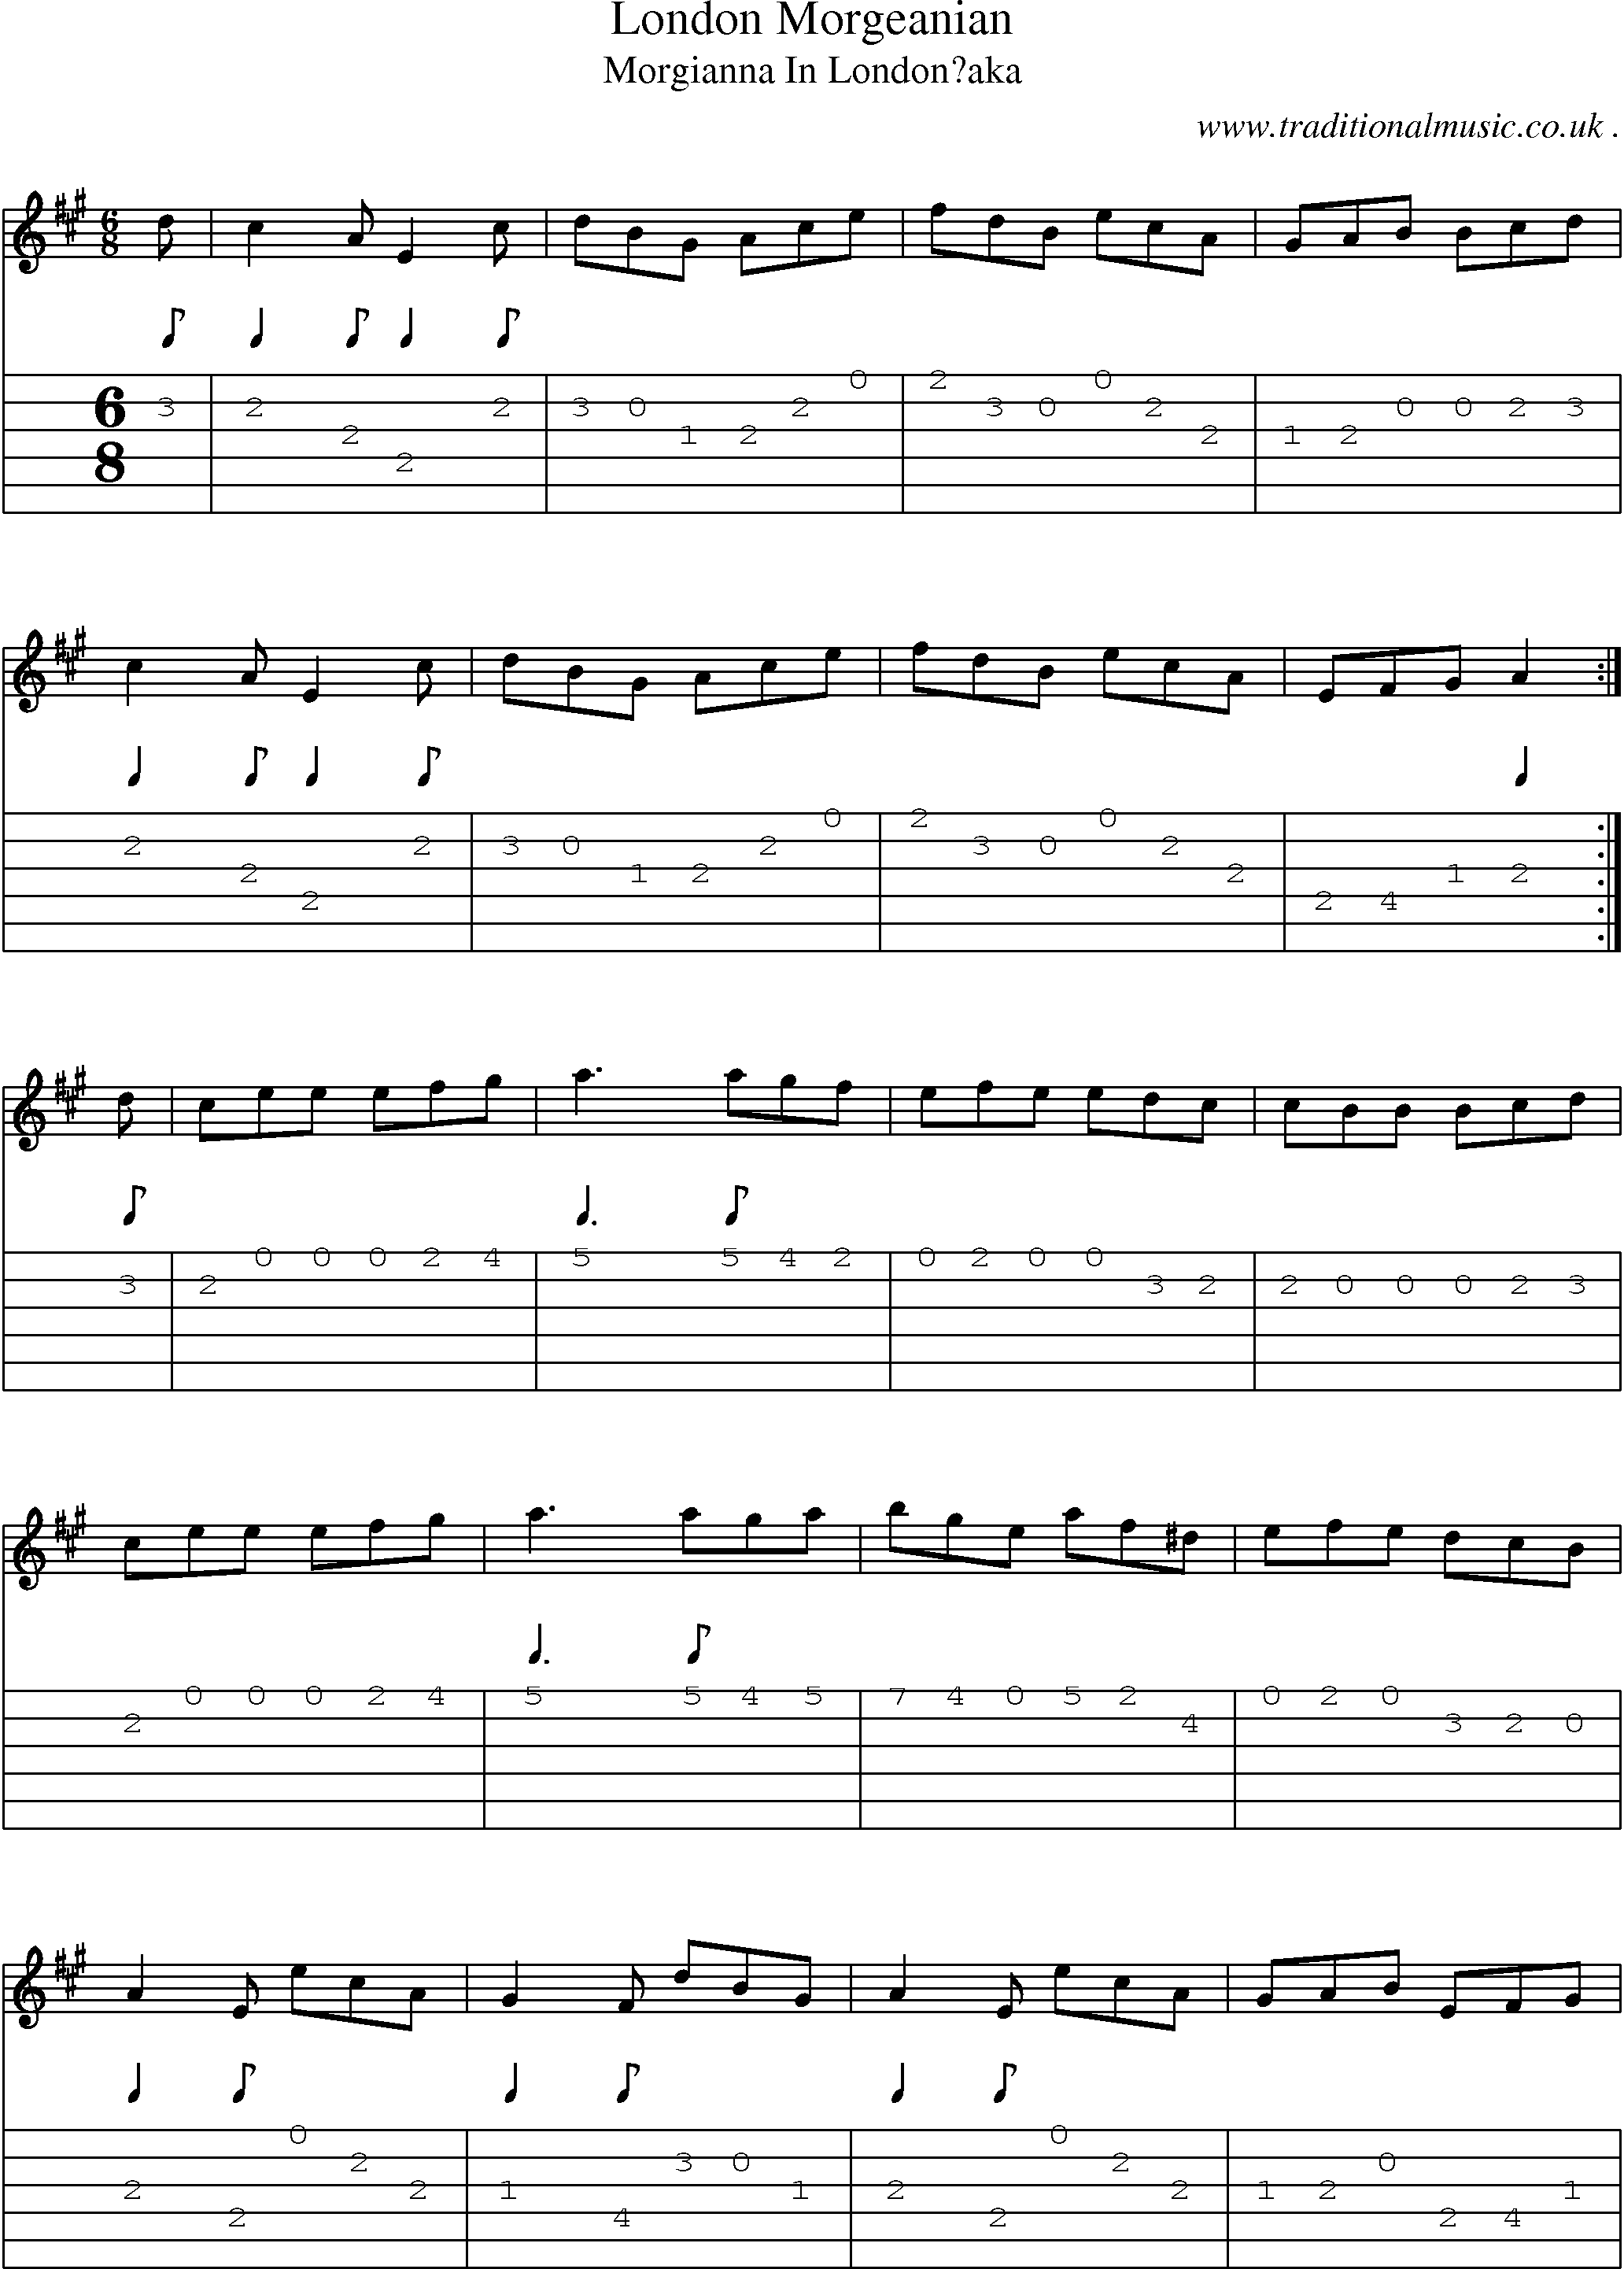 Sheet-Music and Guitar Tabs for London Morgeanian